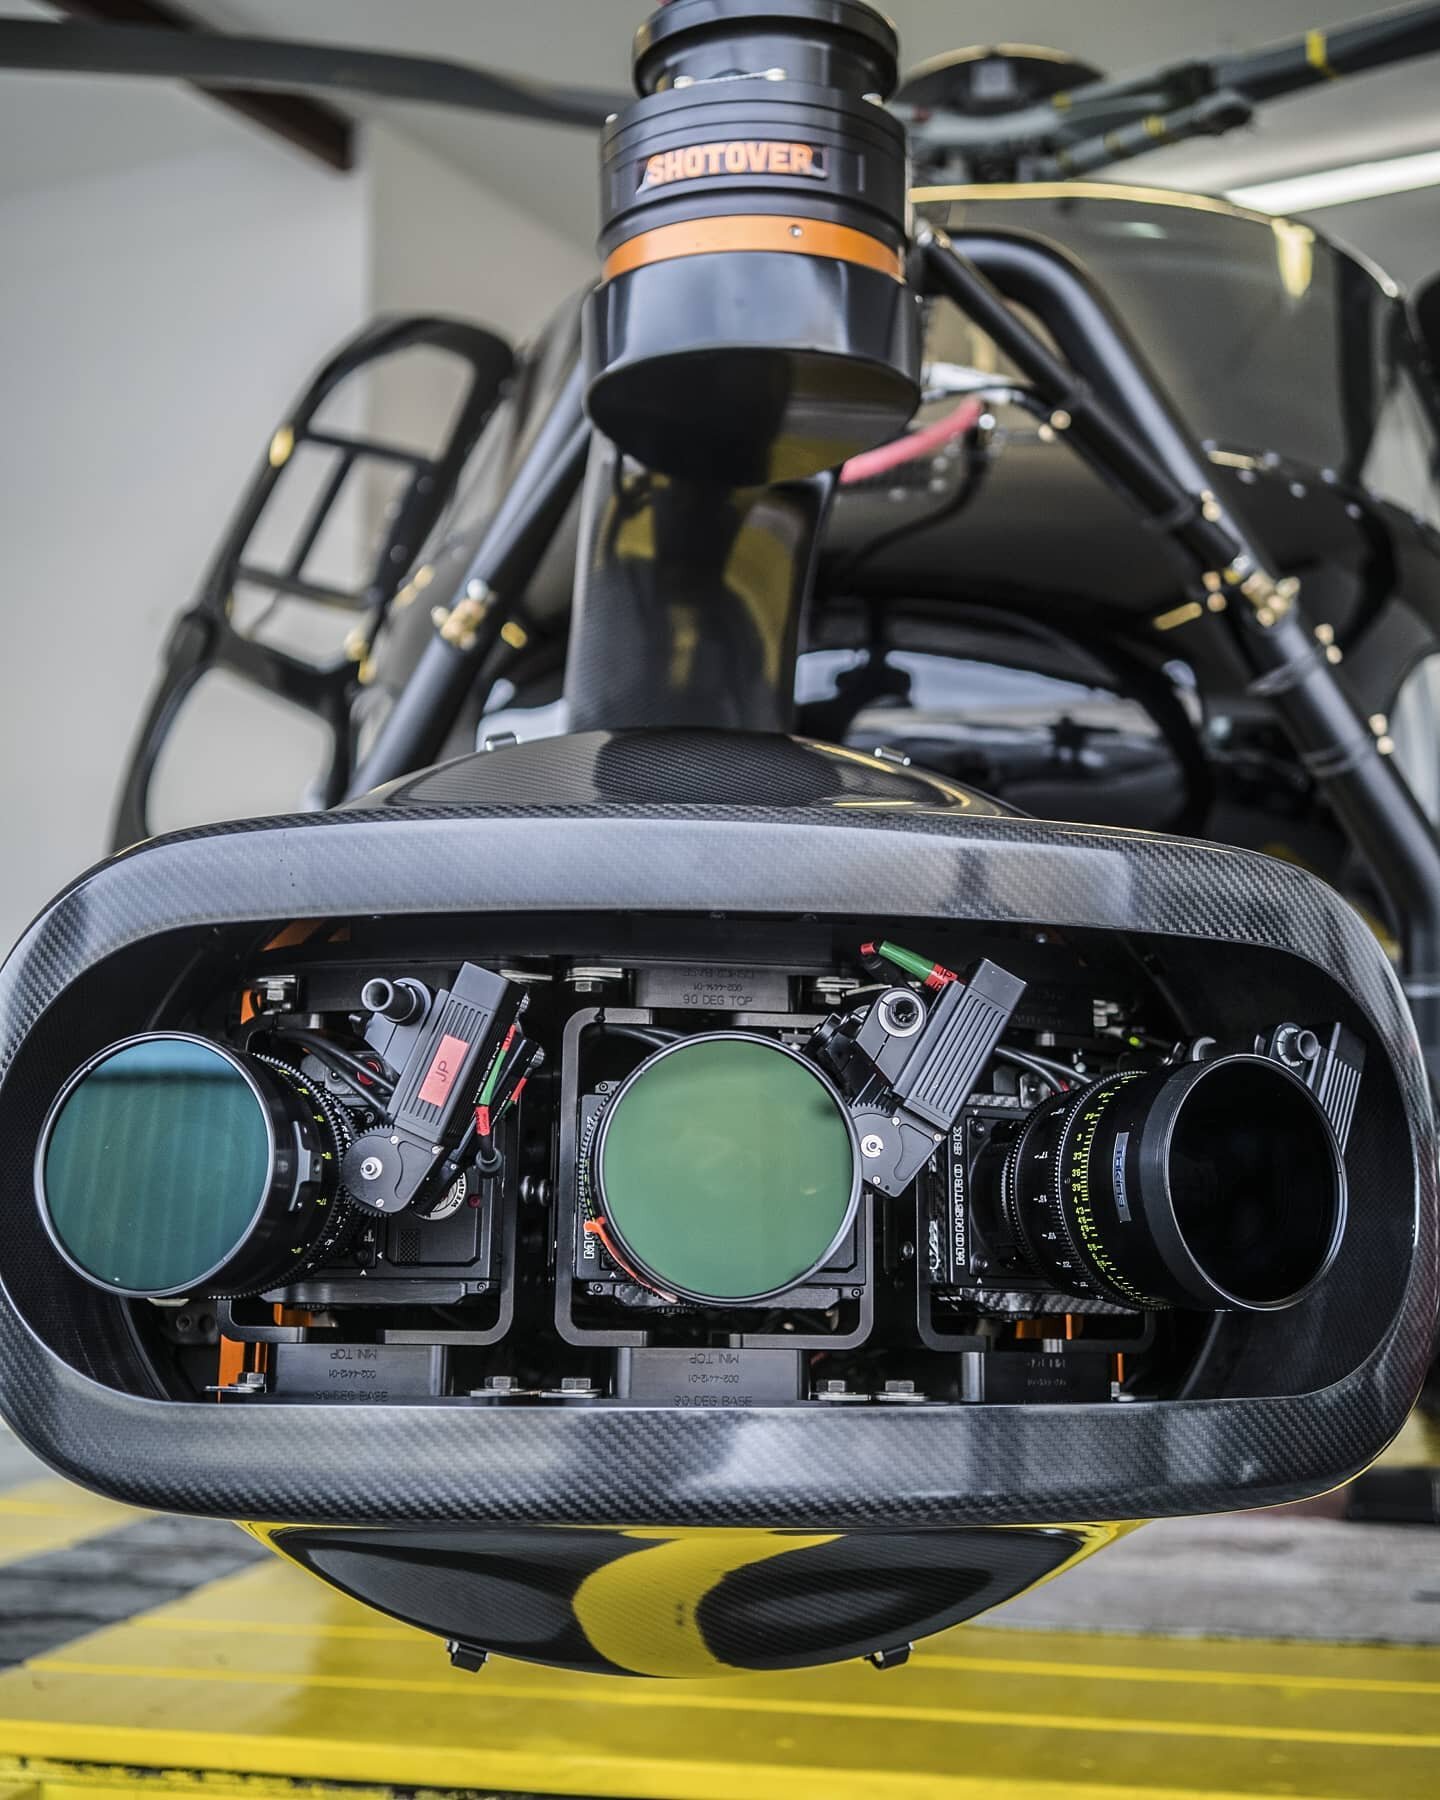 Gotham&rsquo;s Hammerhead system is the most flexible multiple camera aerial array in the world. From ultra high definition 12K video to 220 degree wide panoramics, it can do it. 150MP stills camera and 8K video at the same time? yup, for sure. Three